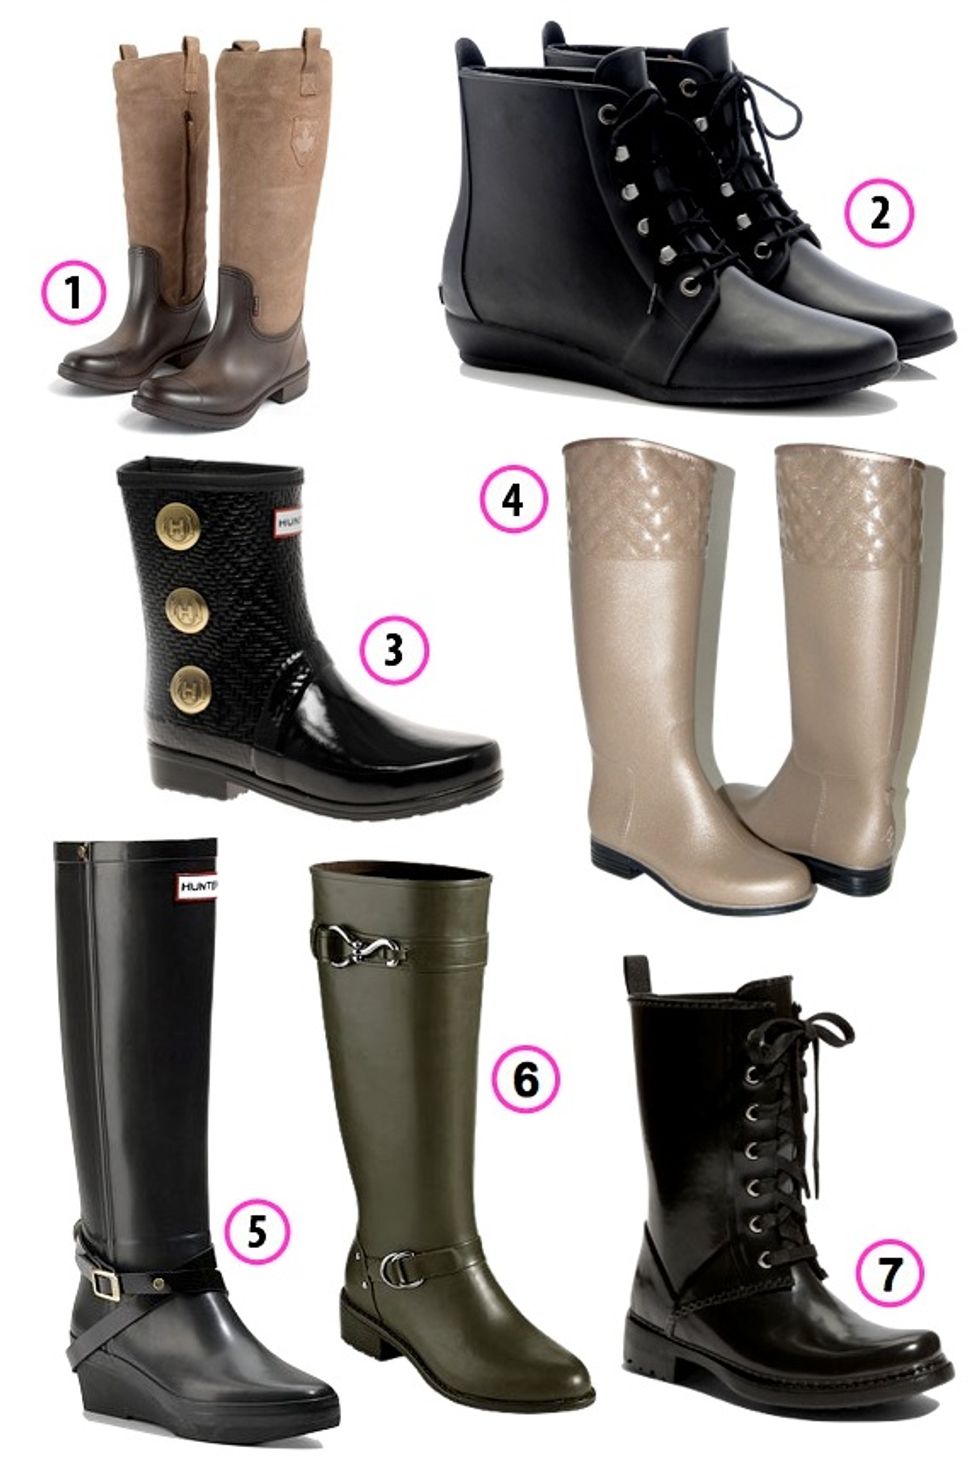 Look of the Week: Wet Weekend, 7 Rain Boots to Get You Through